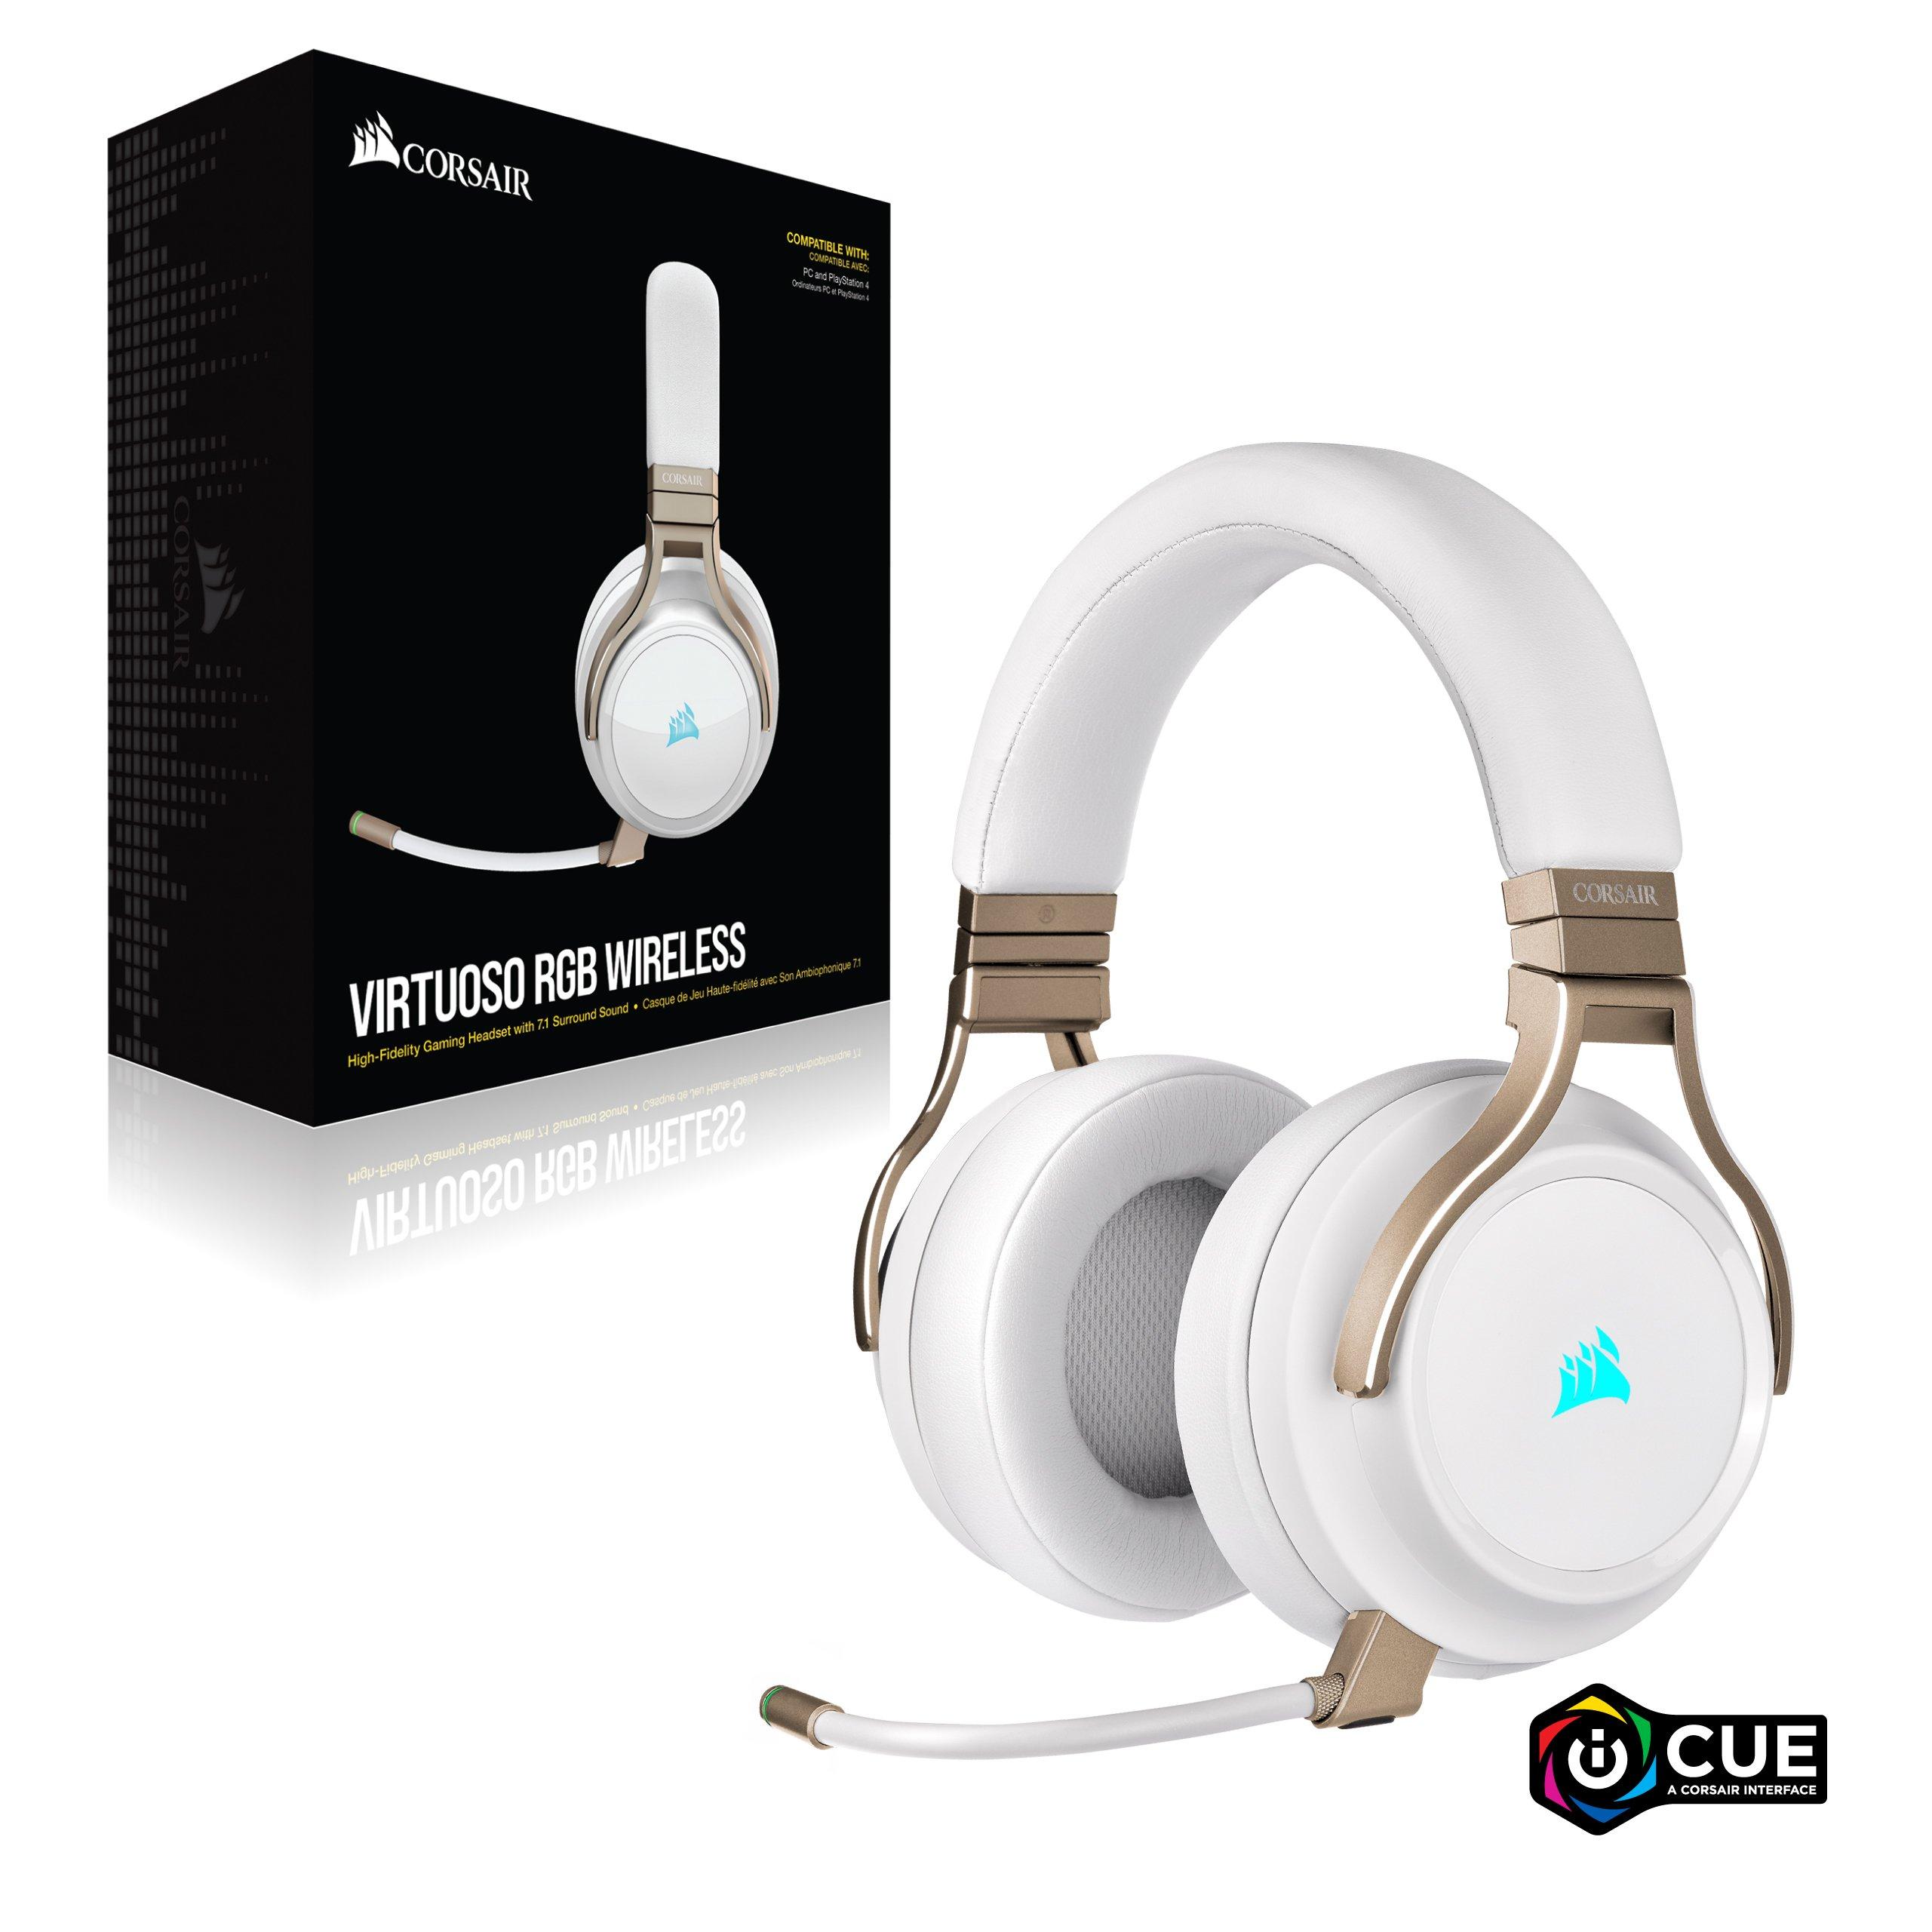  Corsair Virtuoso RGB Wireless Gaming Headset with 7.1 Surround  Sound, Broadcast Microphone, Memory Foam Earcups, 20hr Battery - For PC,  PS4 : Video Games